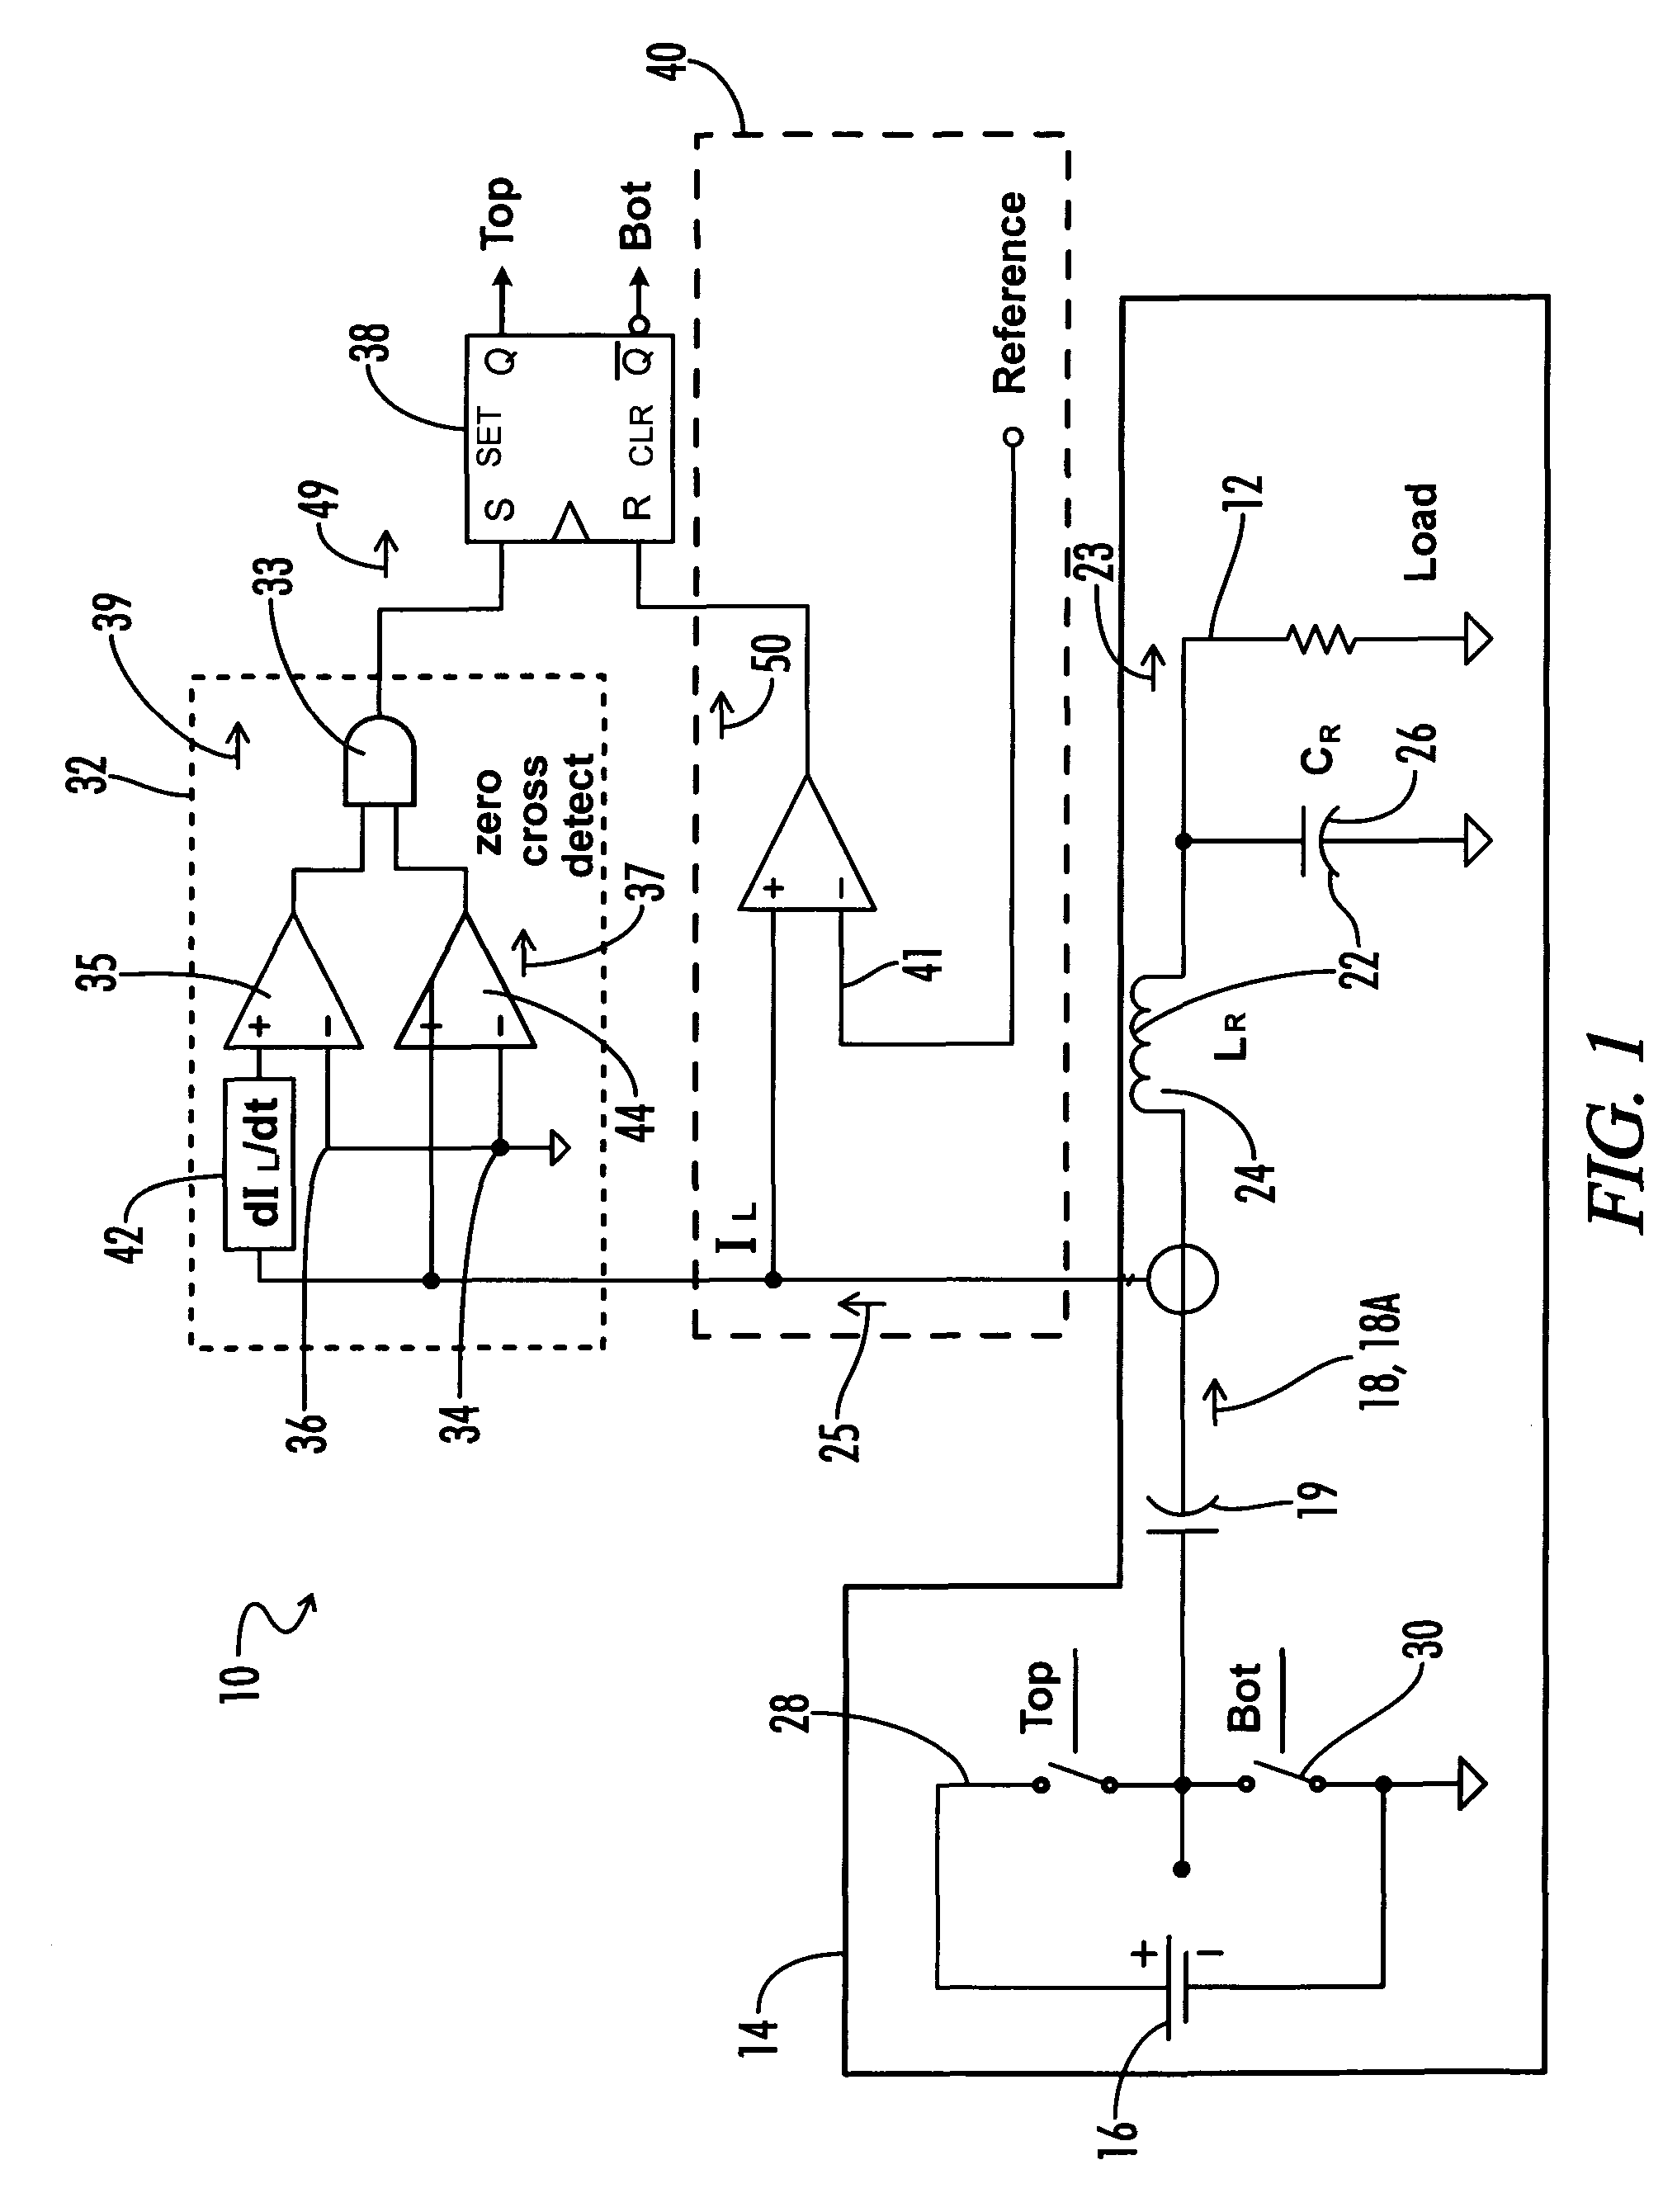 Method of operating a resonant inverter using zero current switching and arbitrary frequency pulse width modulation